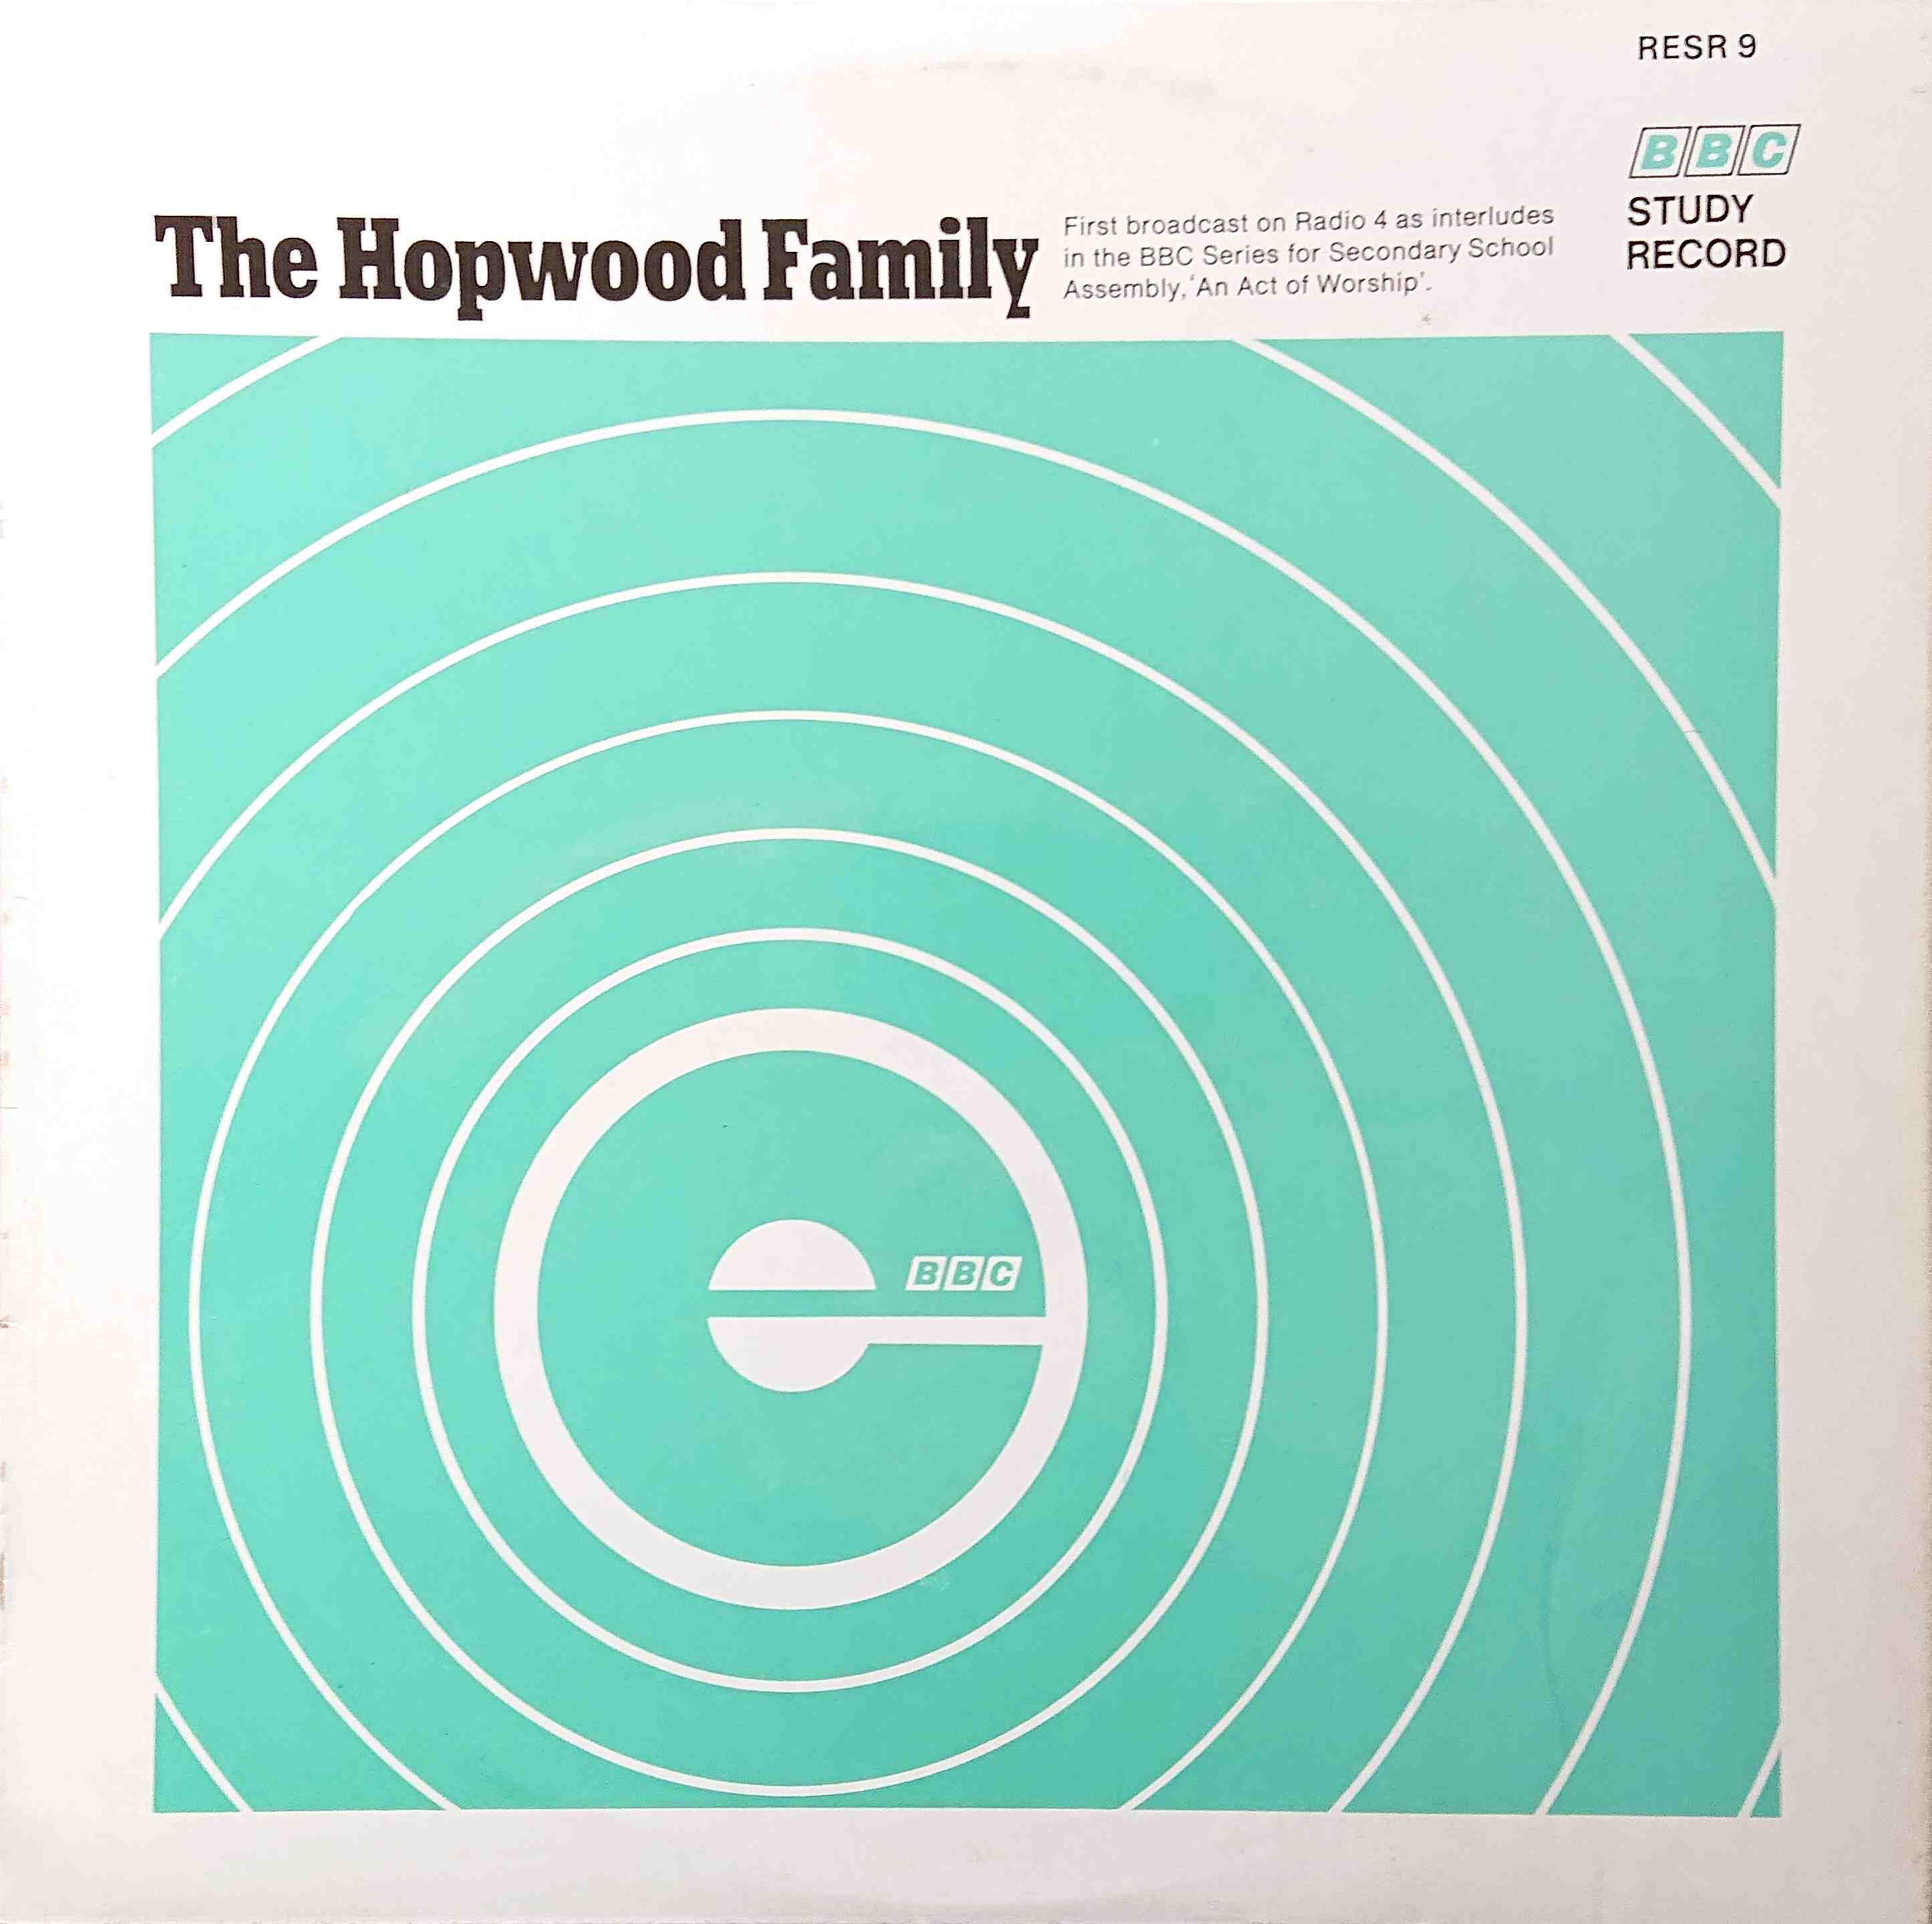 Picture of RESR 9 The Hopwood family by artist Robert Lamb from the BBC albums - Records and Tapes library